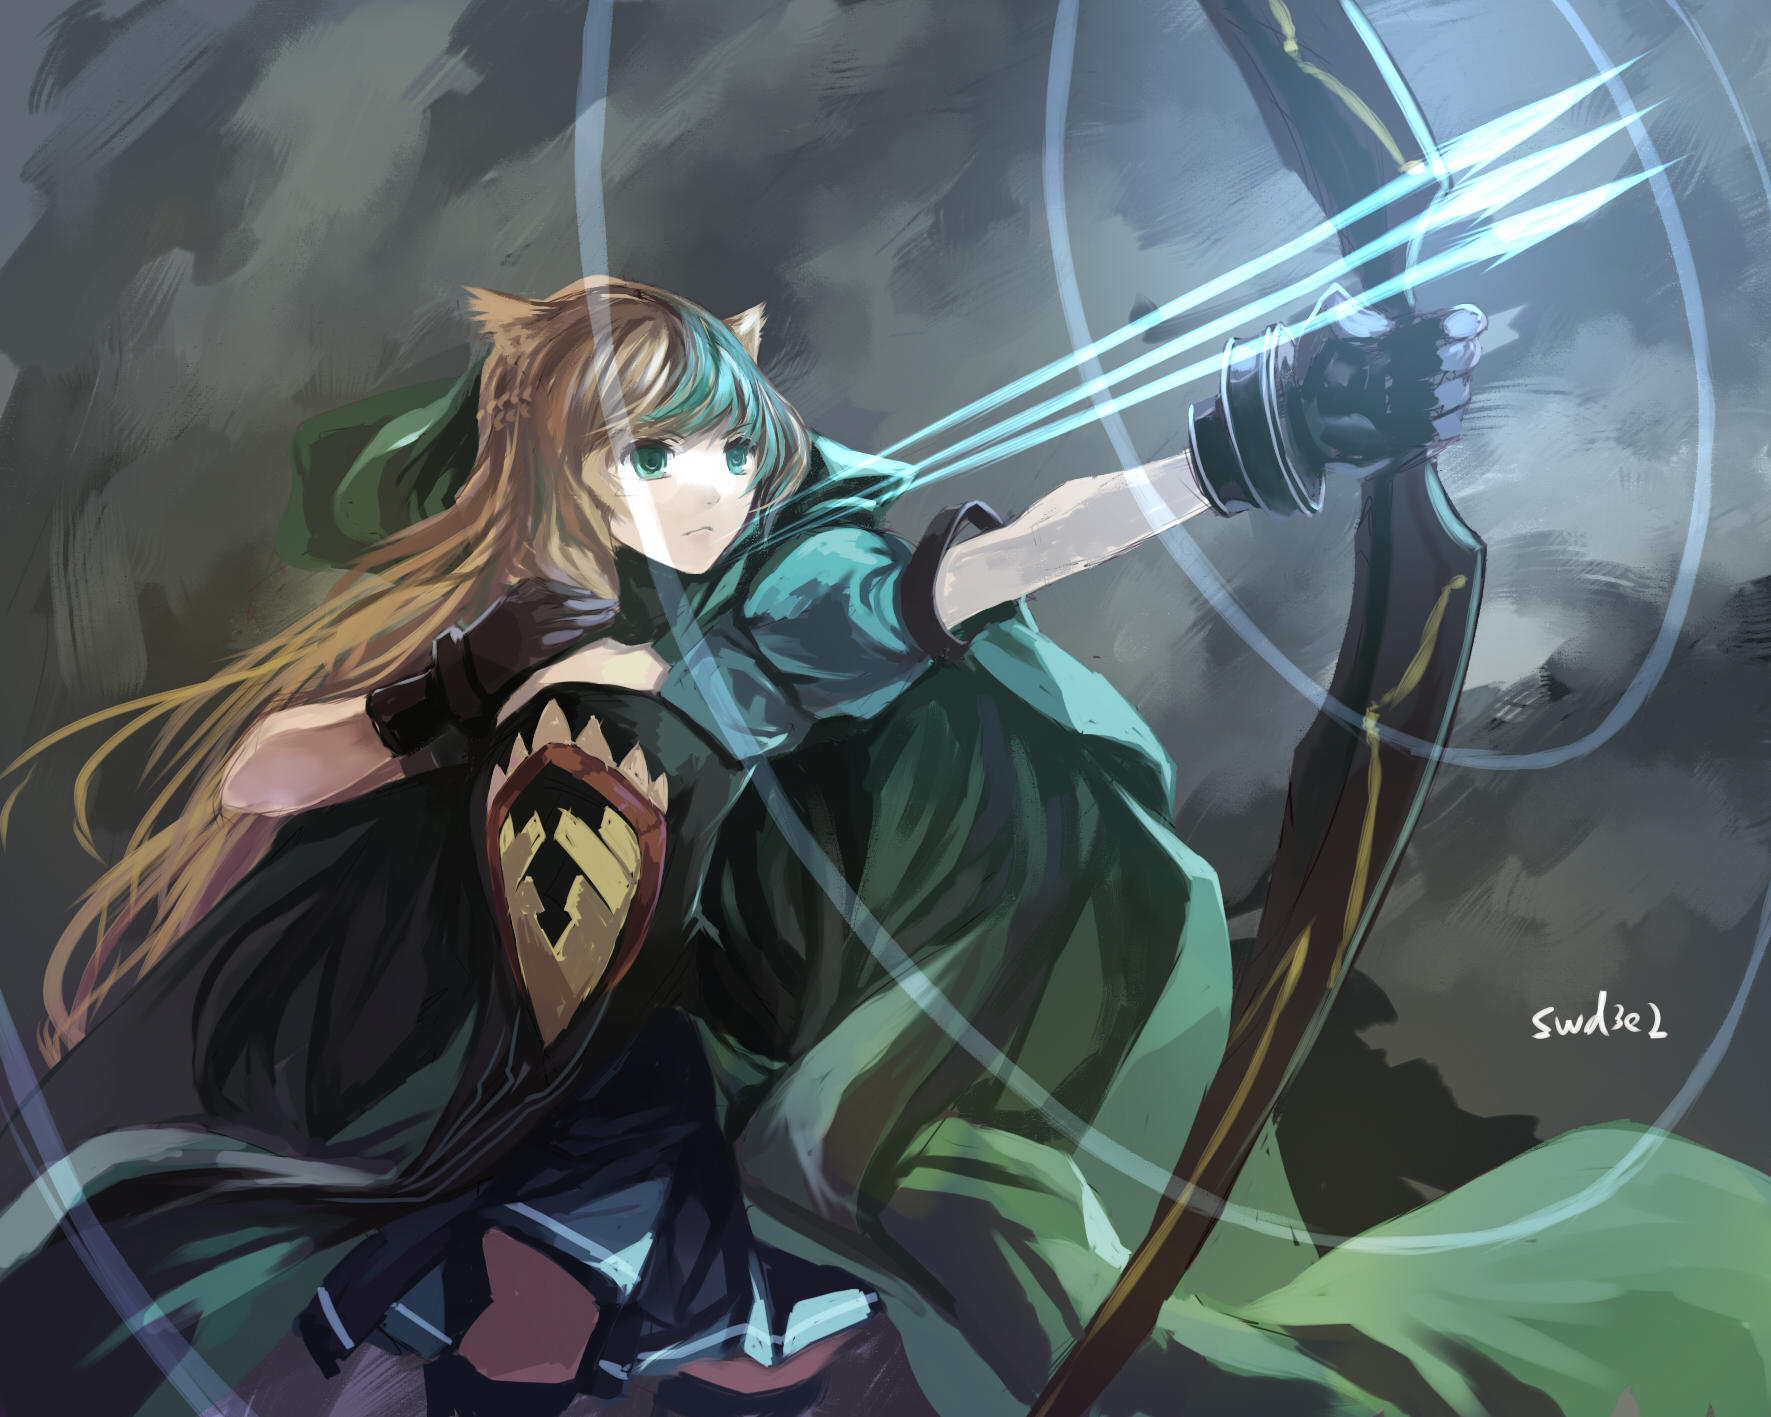 fate, Apocrypha, Animal, Ears, Atalanta, Bow,  weapon , Brown, Hair, Cape, Dress, Fate, Apocrypha, Gloves, Green, Eyes, Long, Hair, Signed, Swd3e2, Weapon Wallpaper